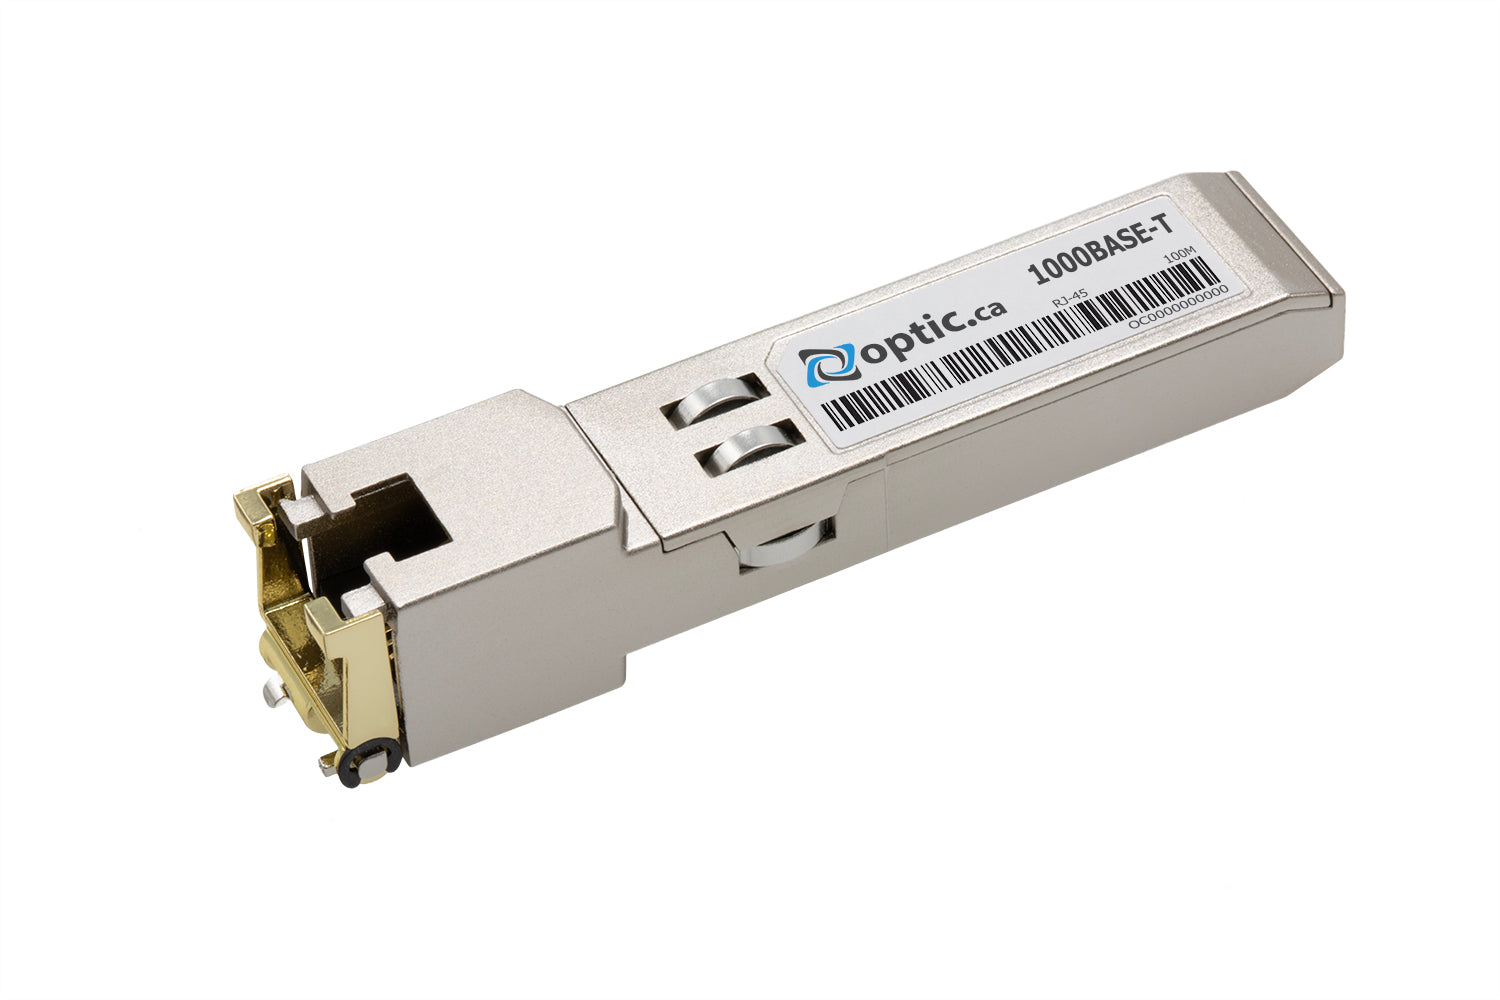 OPTIC.CA - 1000BASE-T SFP - SFP-GE-TX-RED-OC - REDBACK COMPATIBLE